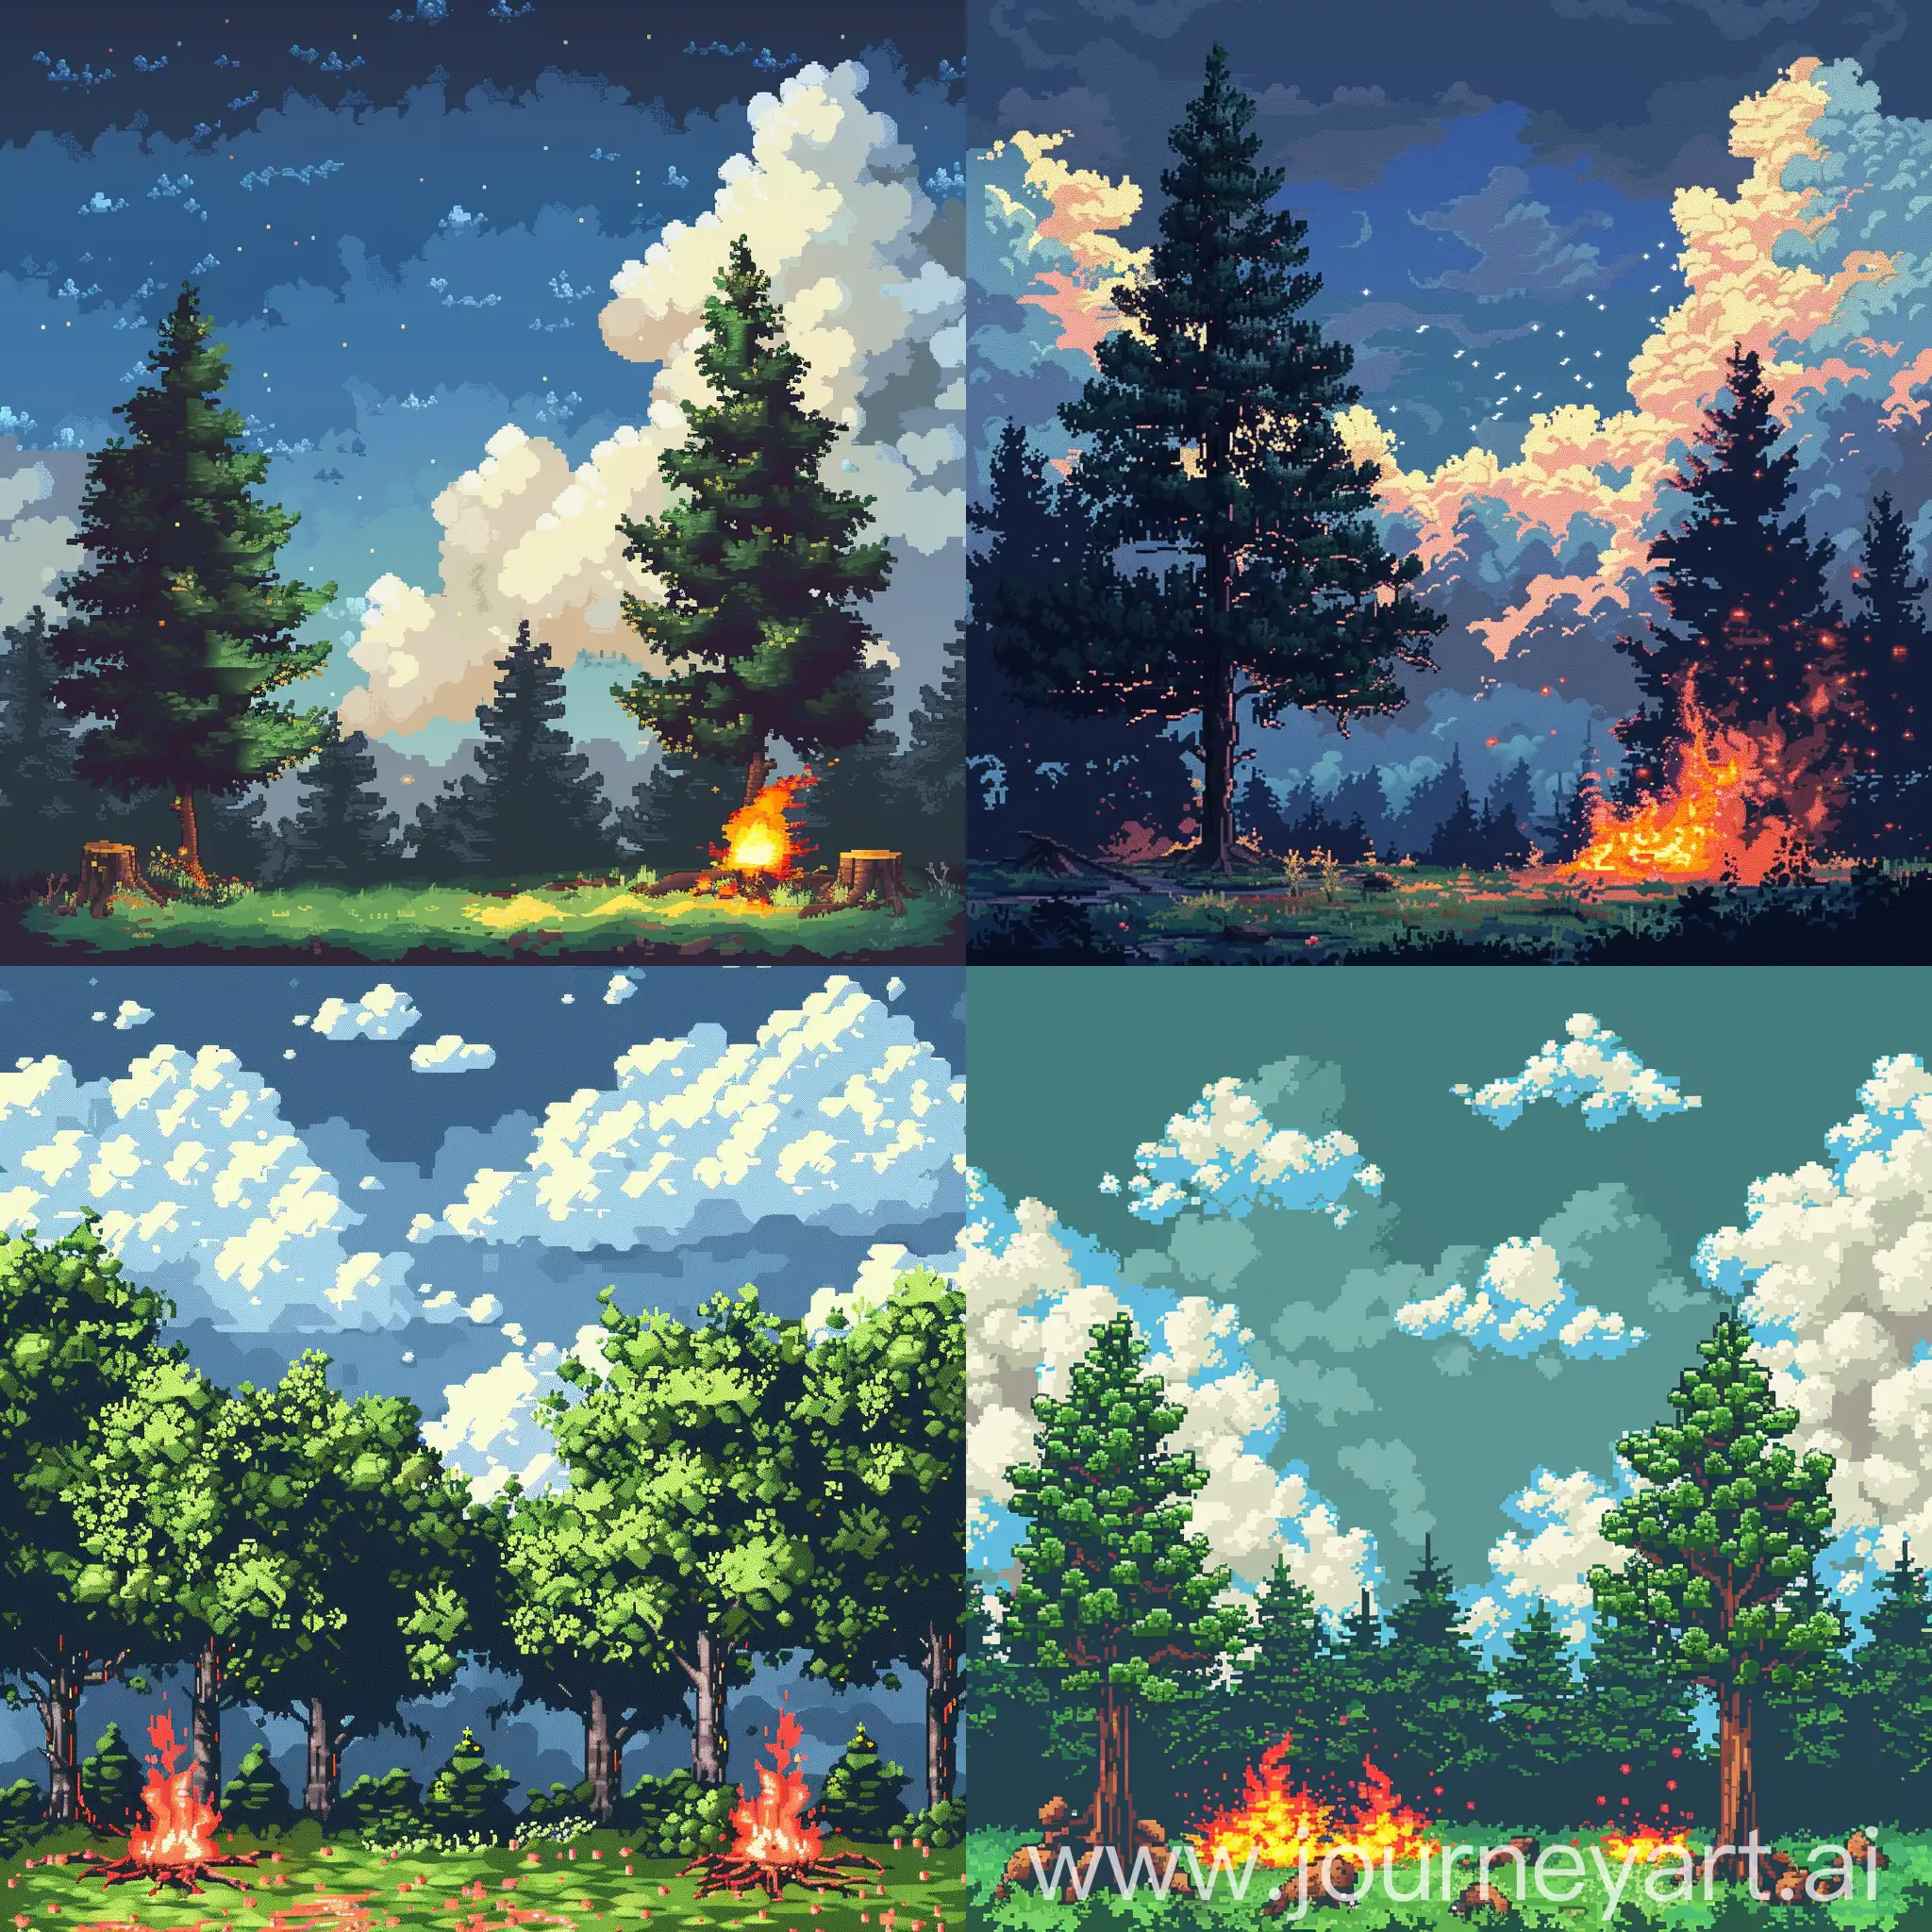 Nature-Pixel-Art-Animation-Tranquil-Forest-Scene-with-Fire-and-Clouds